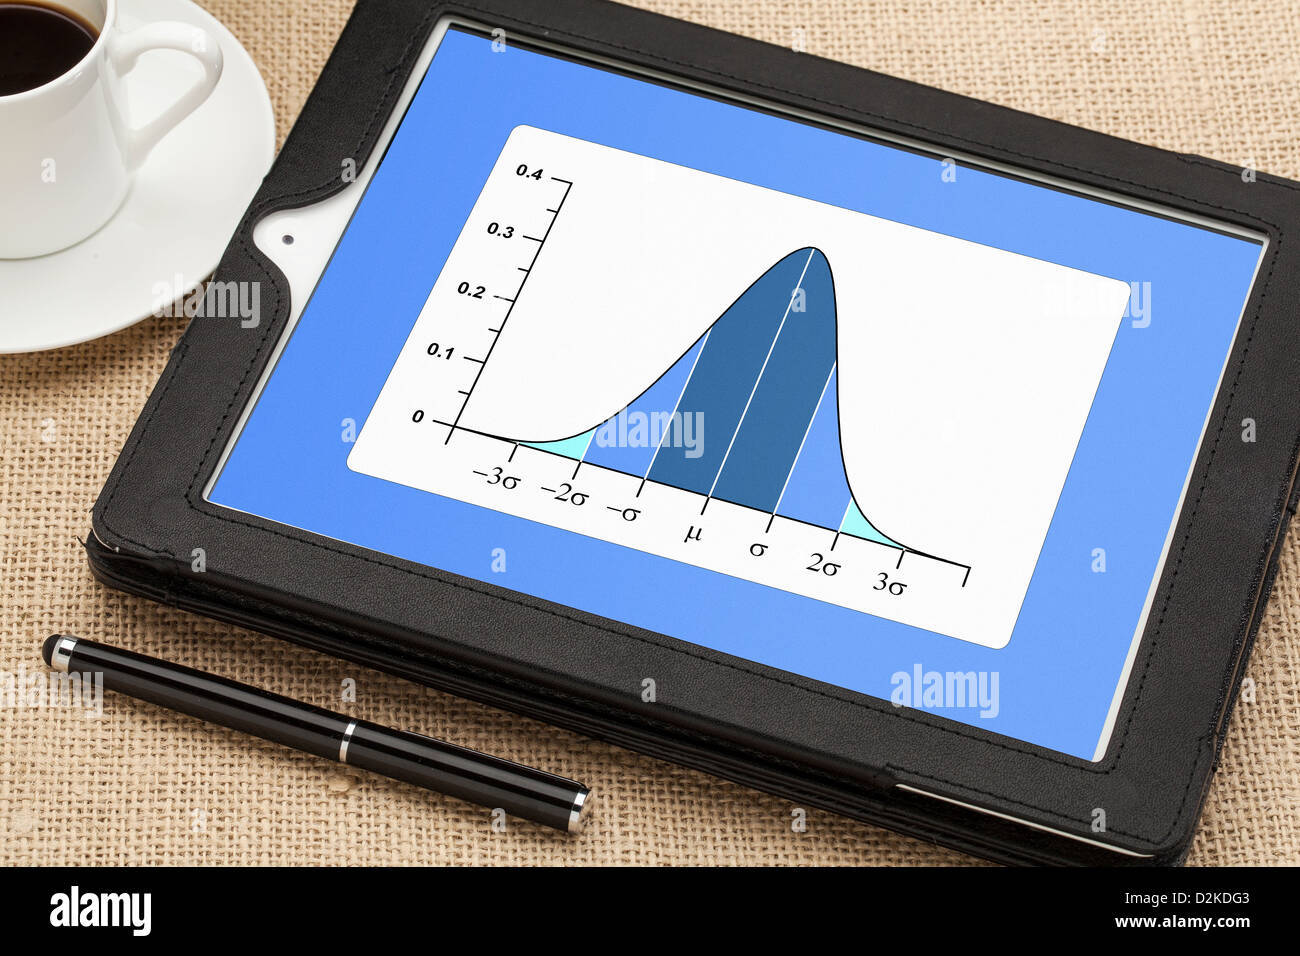 Gaussian, bell or normal distribution curve on digital tablet computer together with a cup of coffee and stylus pen Stock Photo